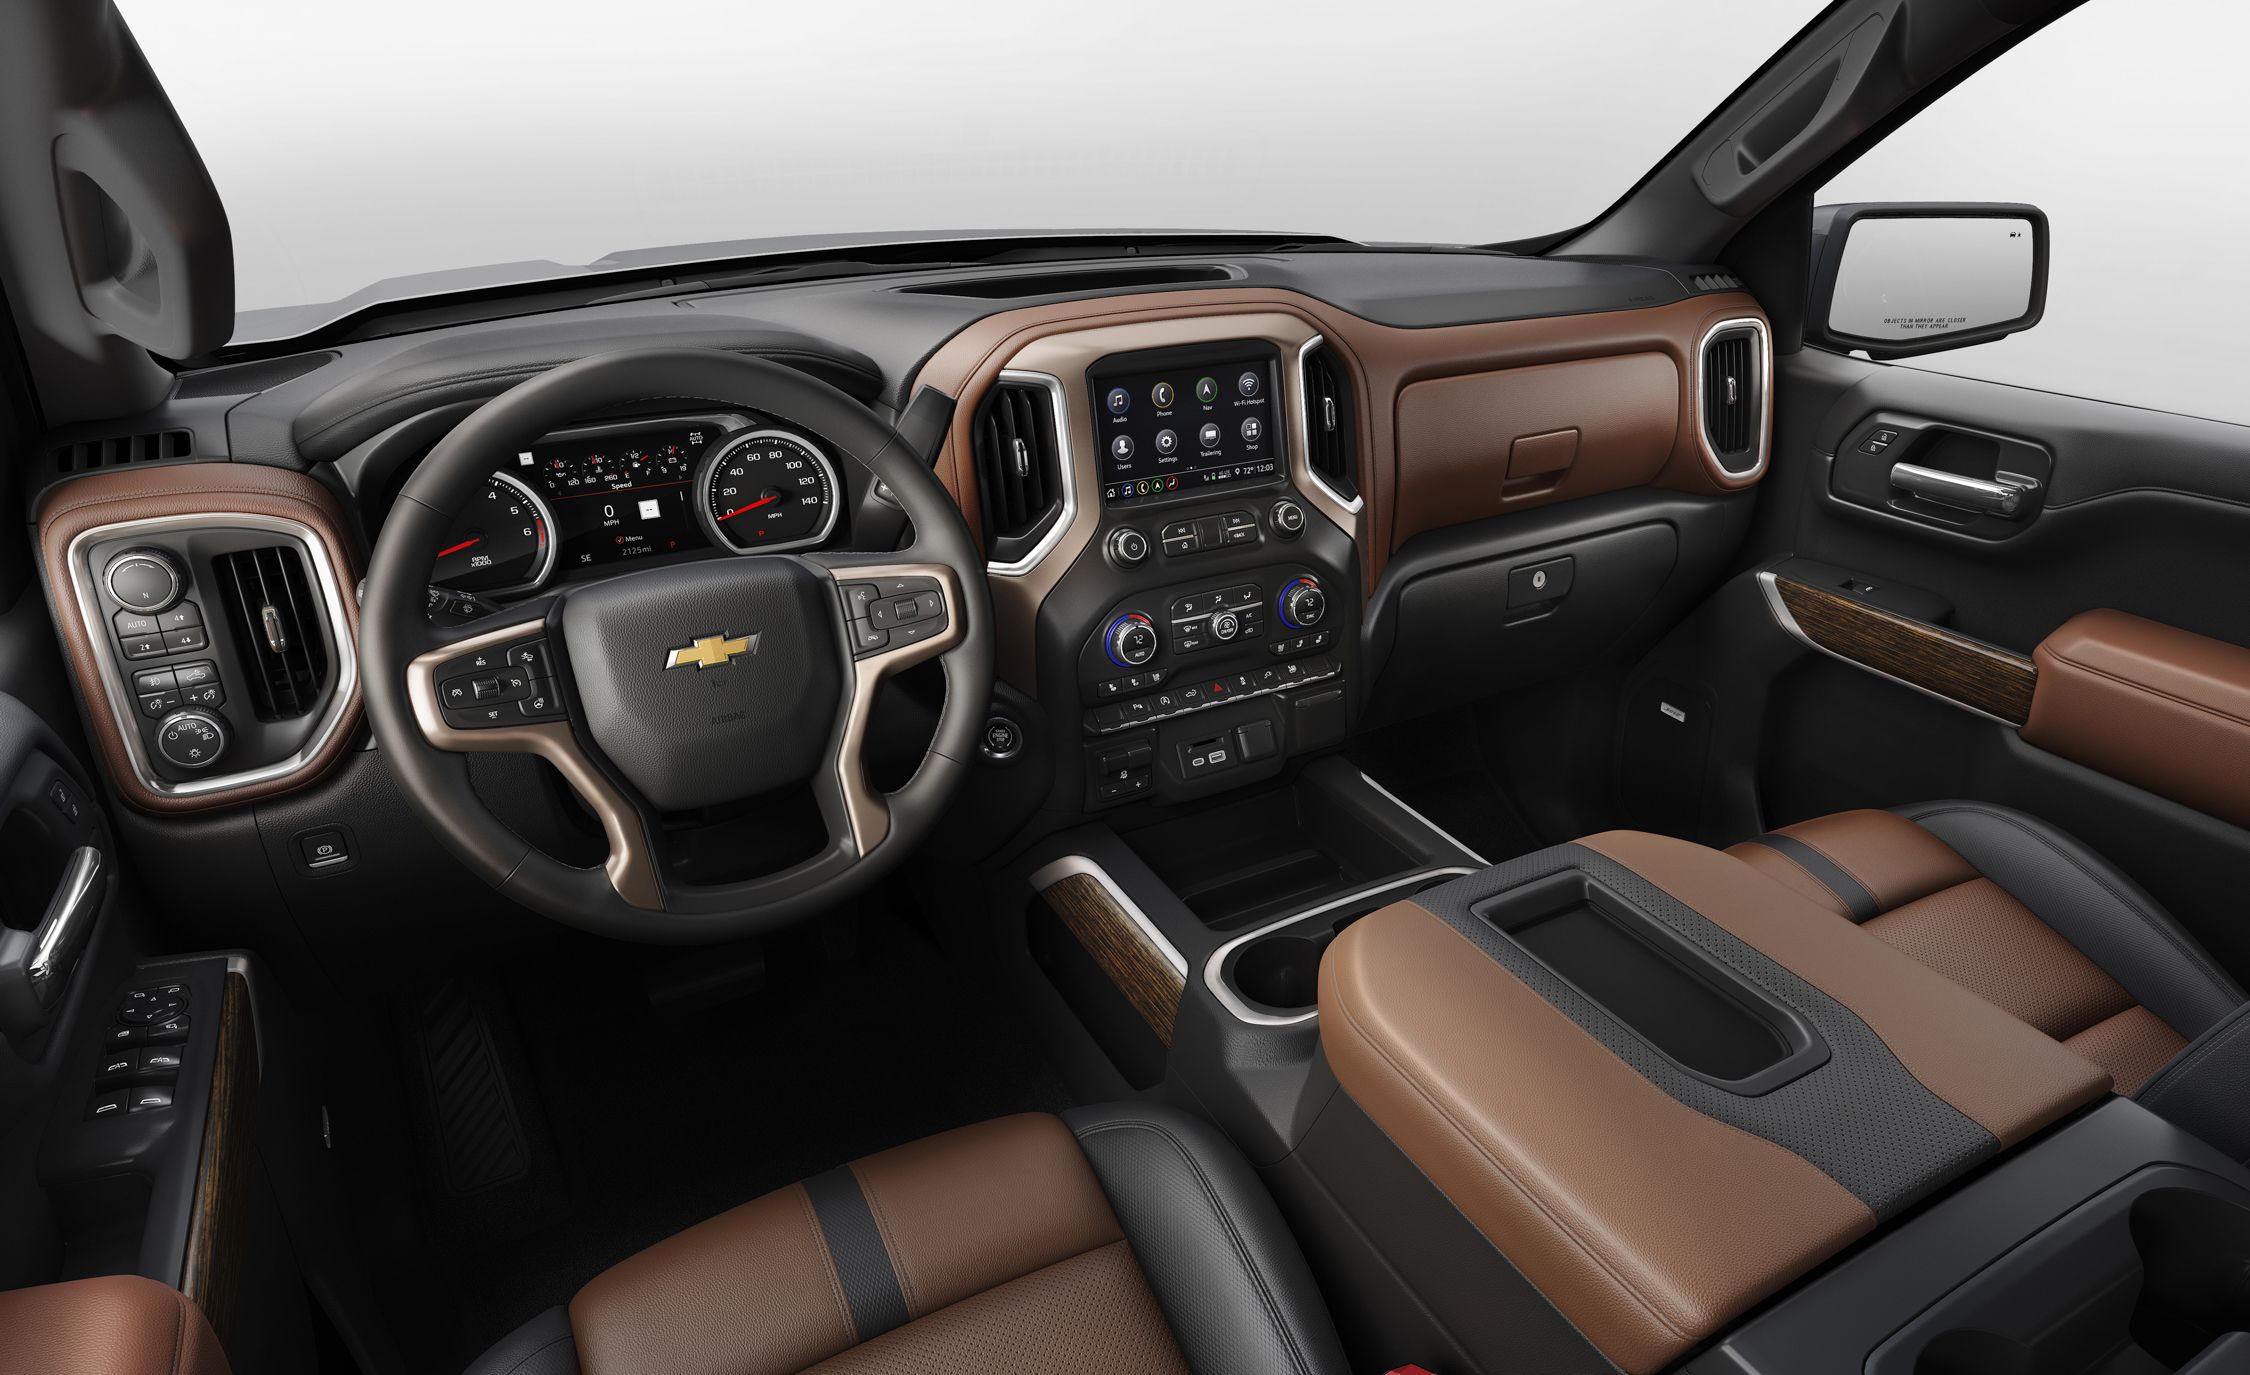 15 Things You Need to Know about the 2019 Chevy Silverado 1500